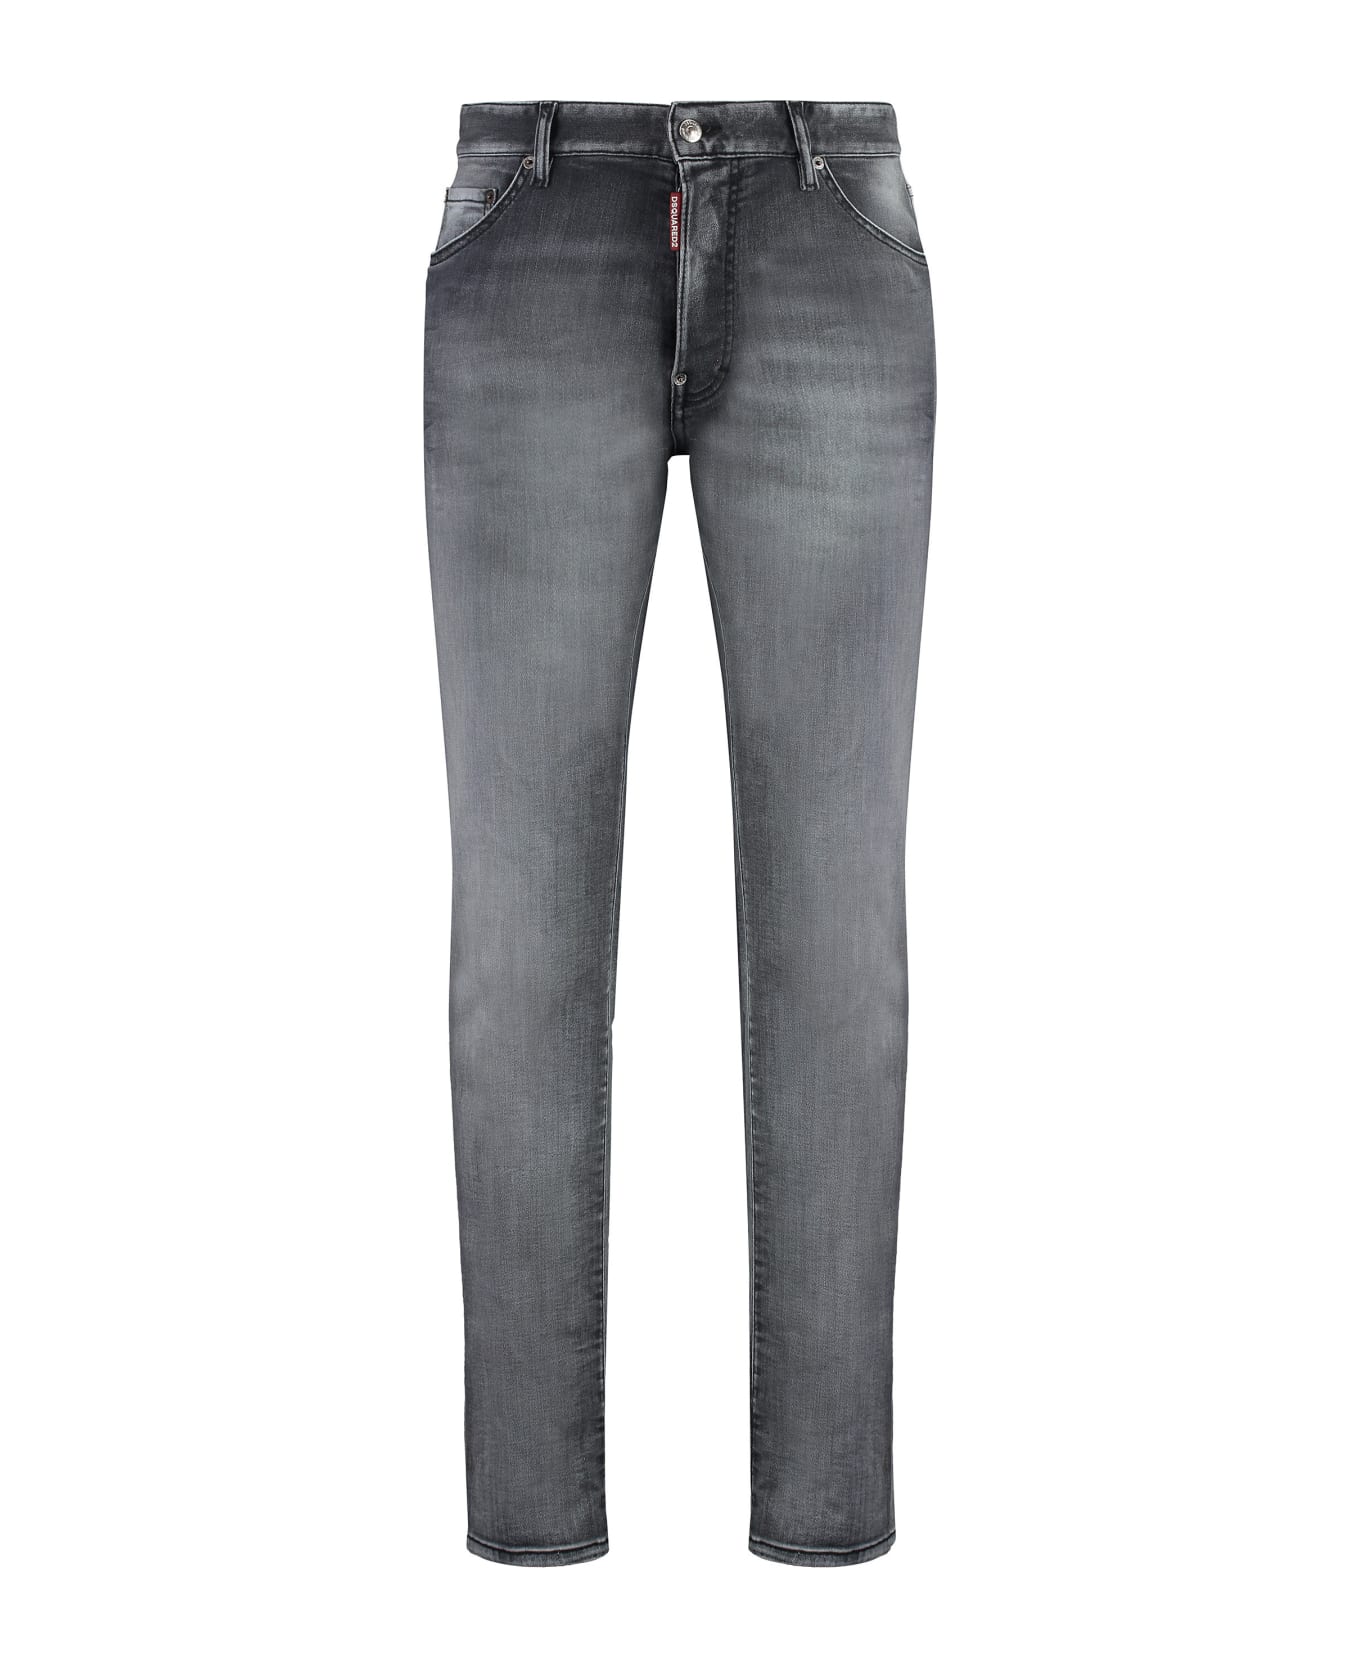 Dsquared2 Cool Guy Jeans - grey デニム